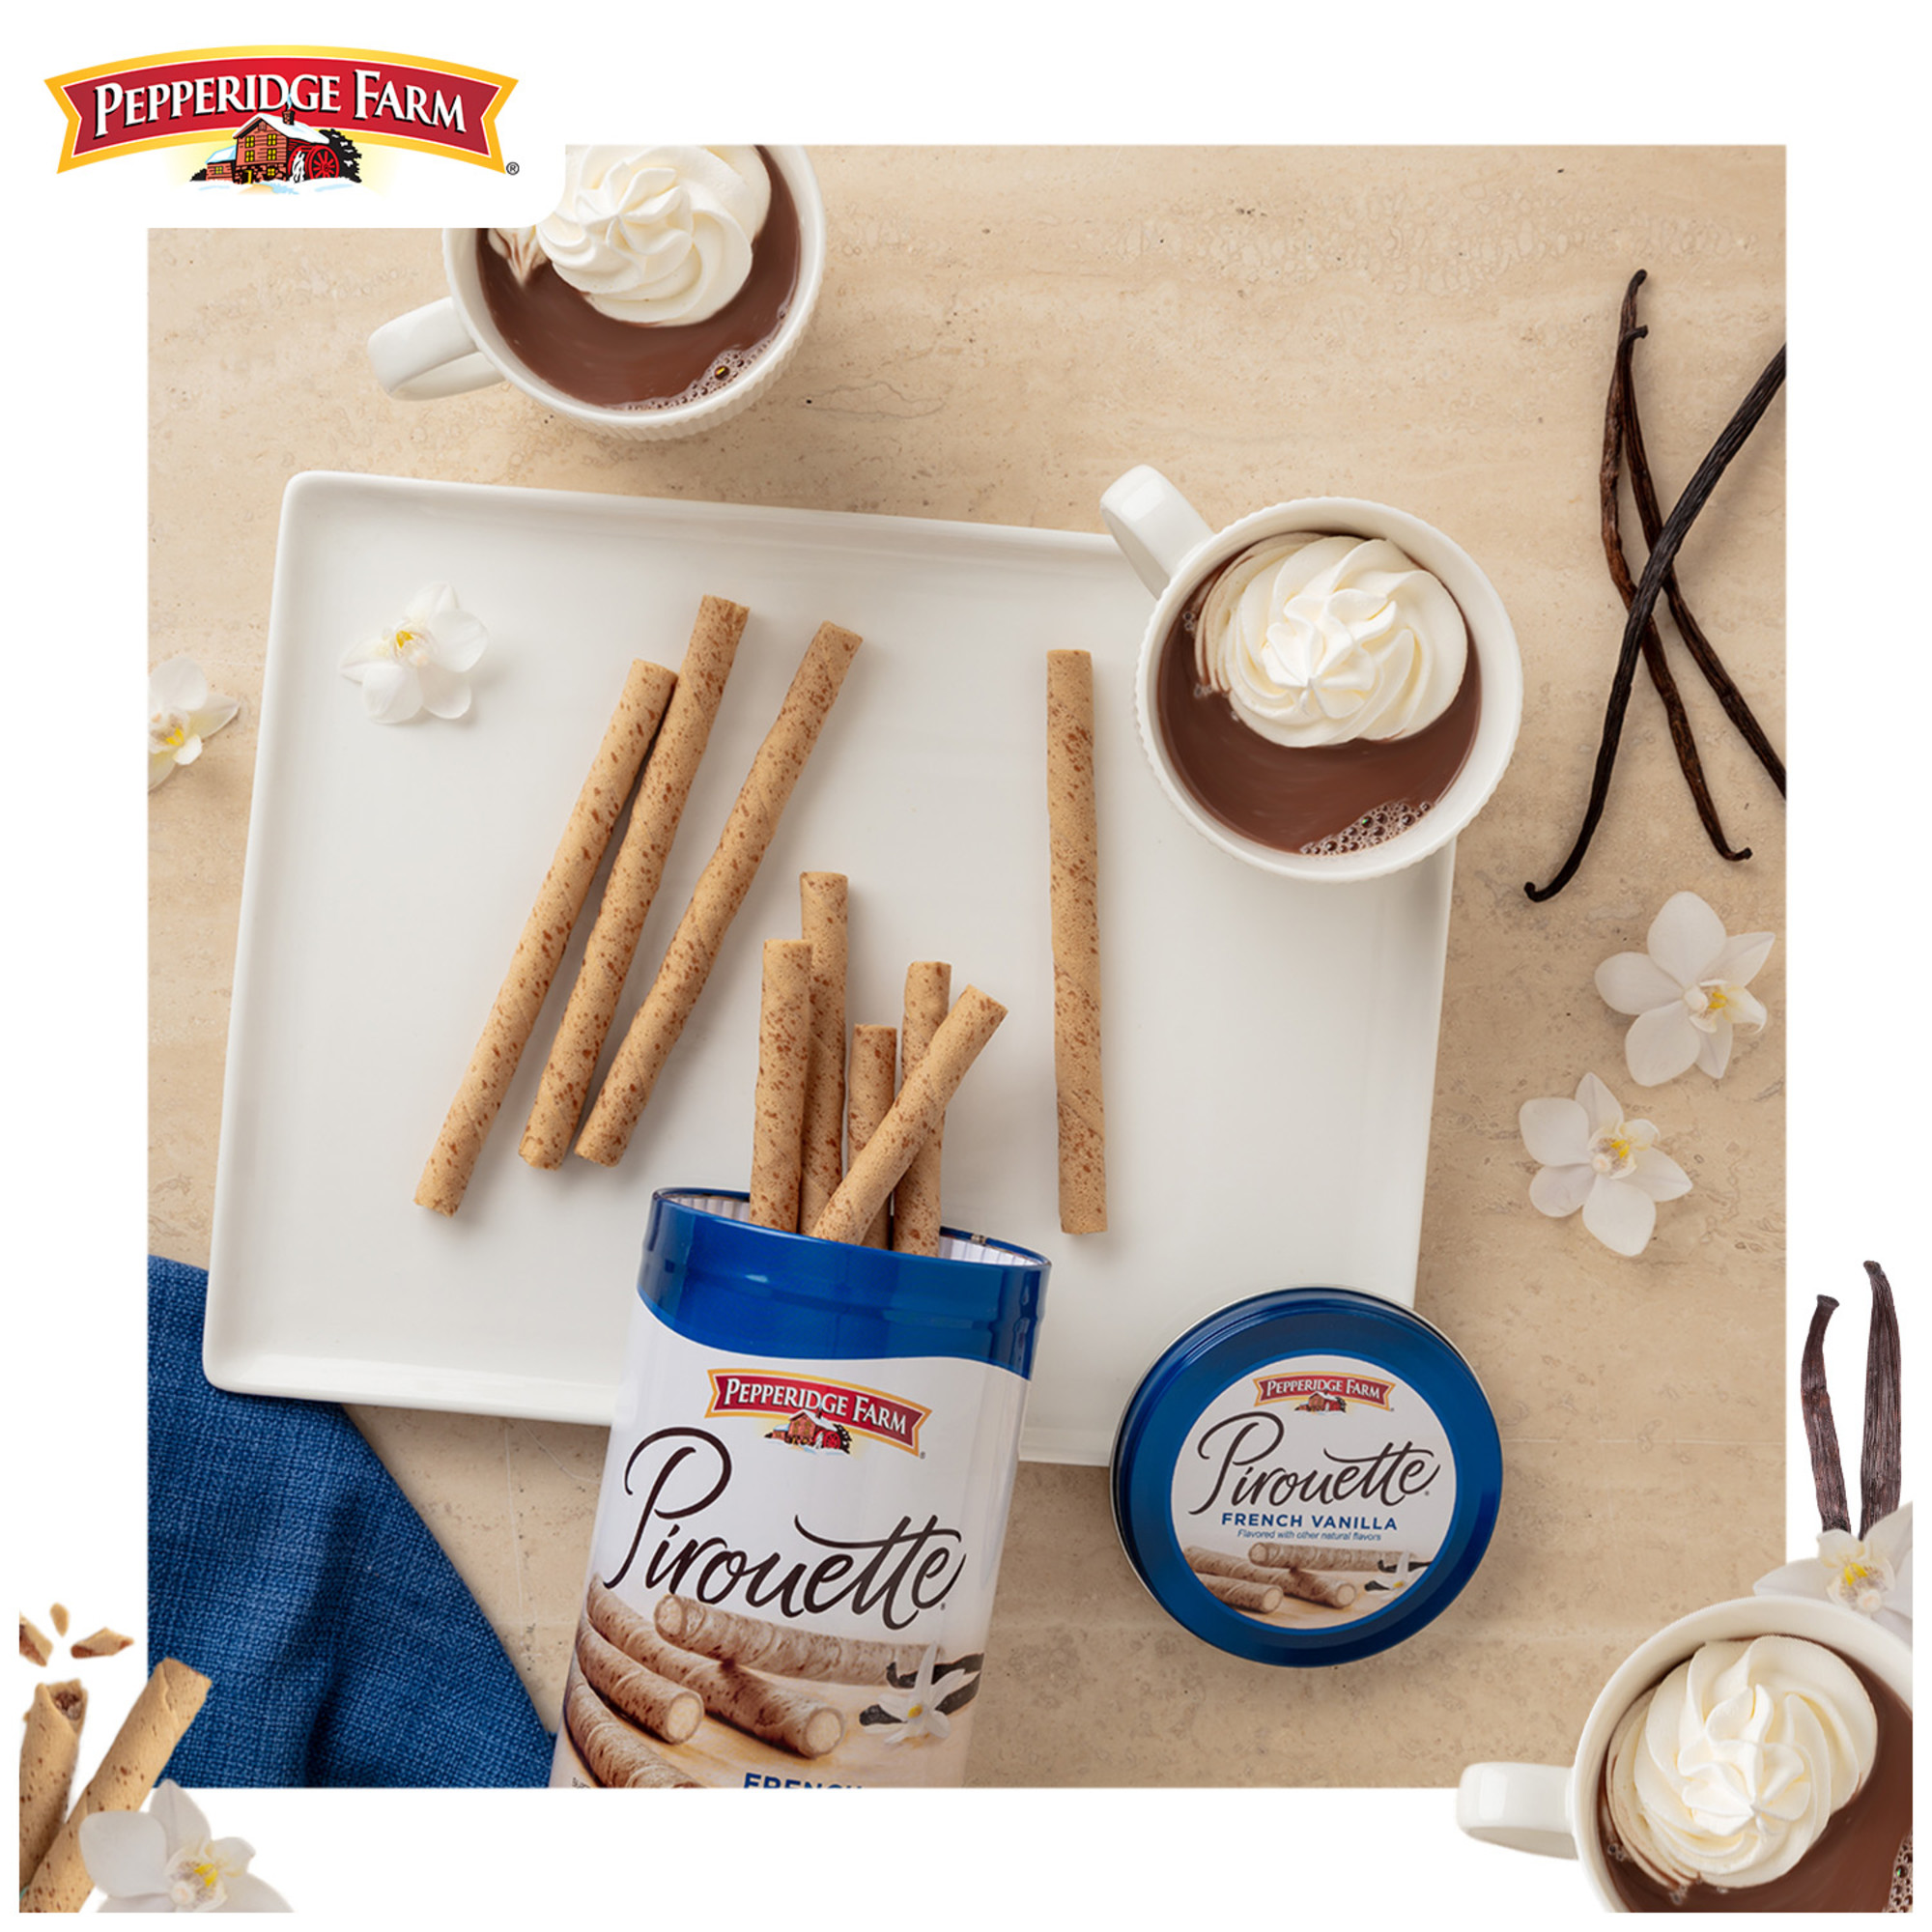 Pepperidge Farm Pirouette Cookies, French Vanilla Crème Filled Wafers, 13.5 oz Tin - image 3 of 9